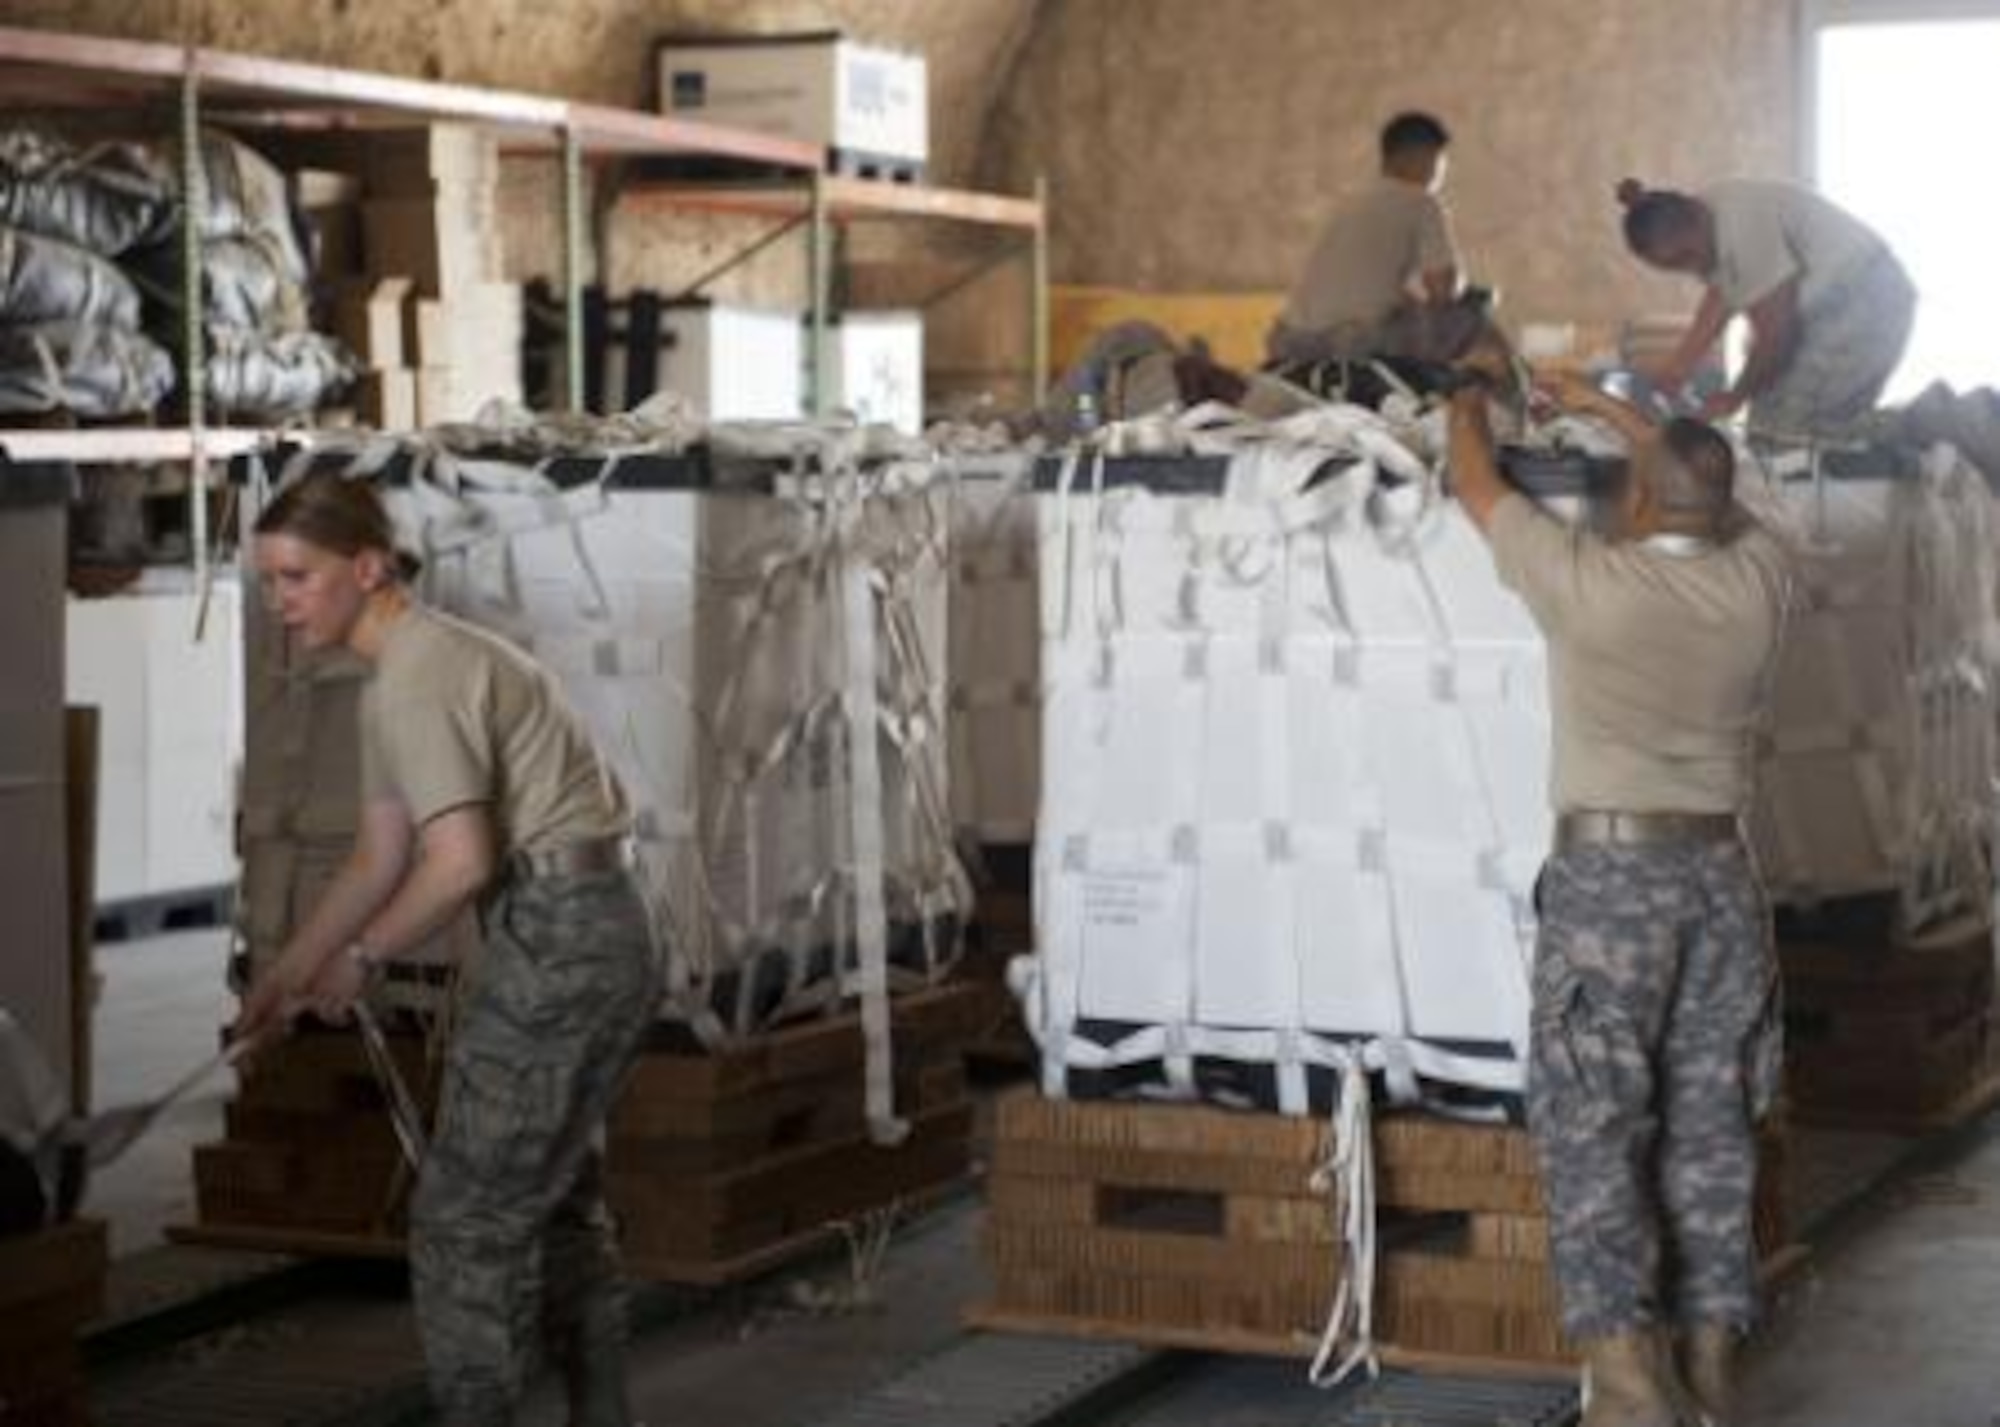 Service member volunteers push a completed pallet of food and water to prepare it for loading onto aircraft at a location in Southwest Asia Aug. 11, 2014. Volunteers from across the base came out to help build pallets of humanitarian aid. The pallets are being airdropped to displaced citizens in the vicinity of Sinjar, Iraq. (U.S. Air Force photo by Senior Airman Colin Cates)







